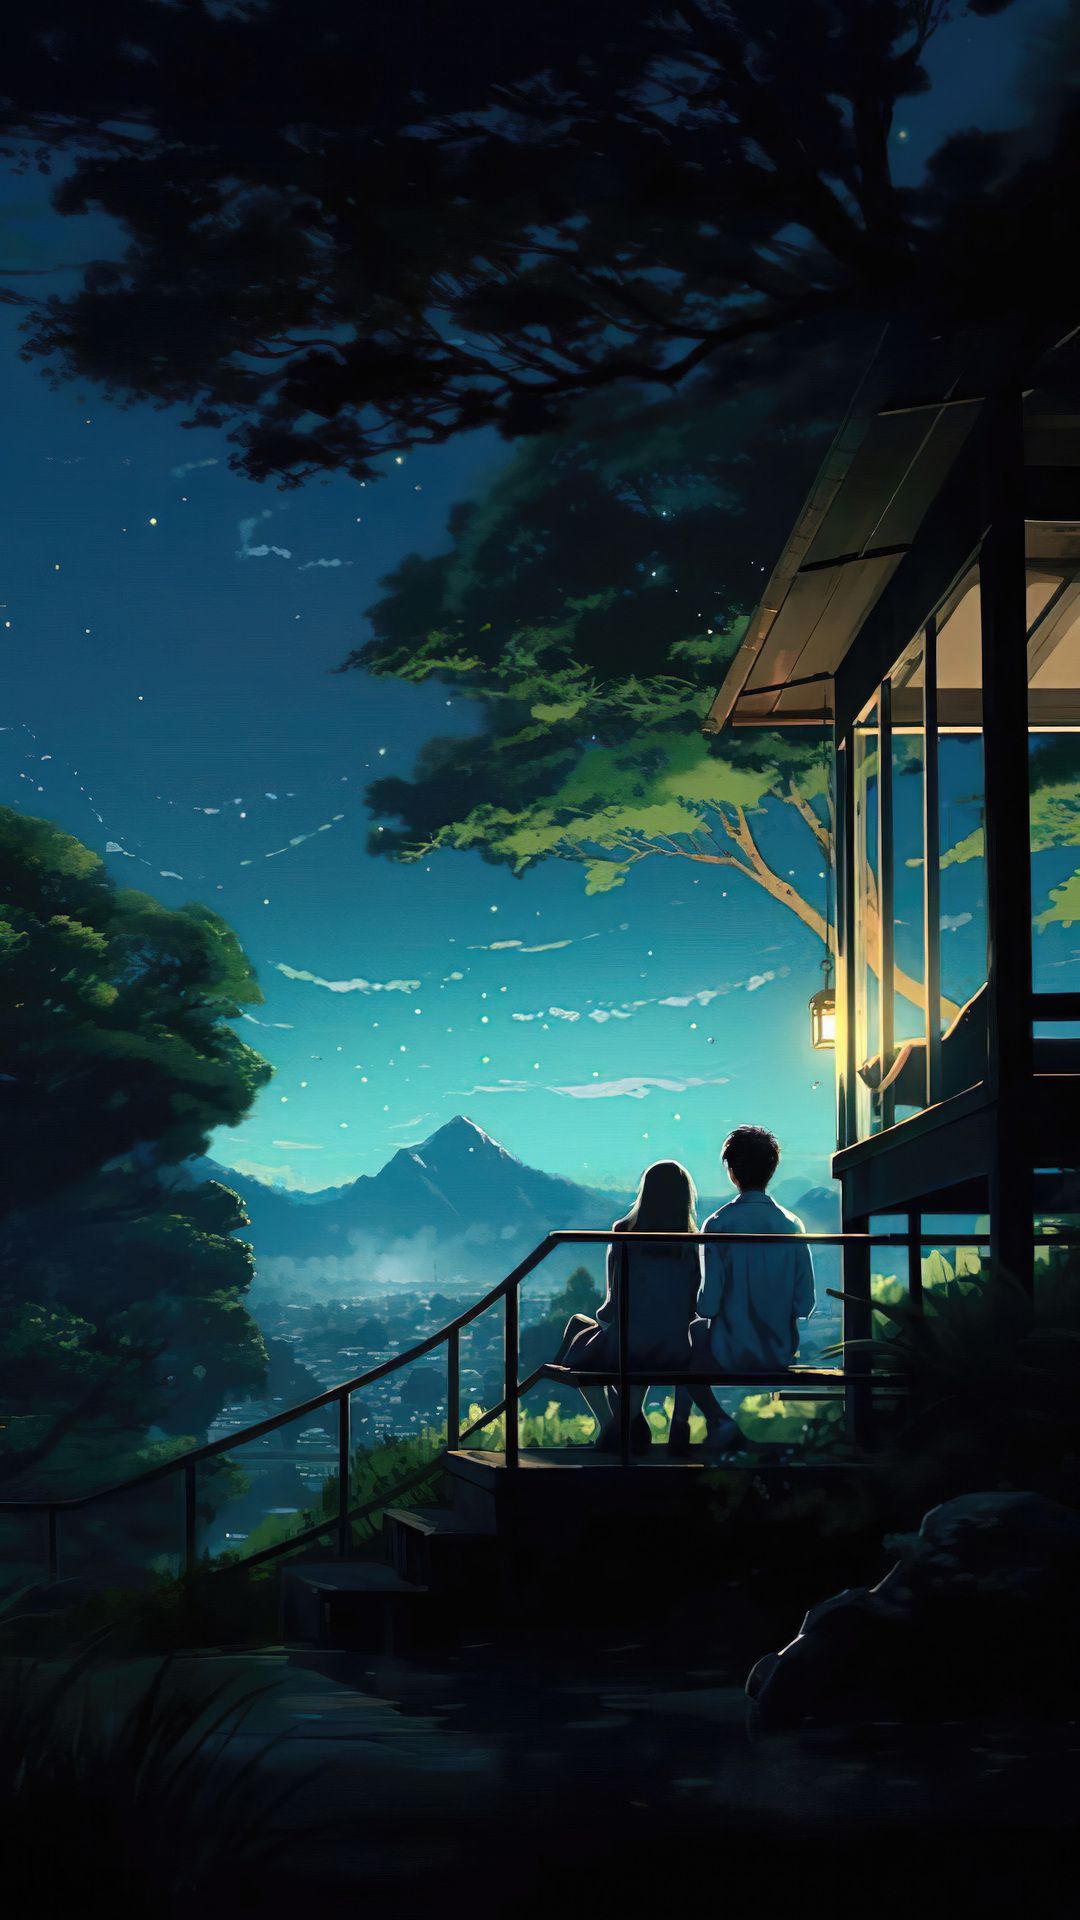 Anime Couple Sitting On Bench Looking At Landscape iPhone 6s, 6 Plus, Pixel xl , One Plus 3t, 5 HD 4k Wallpaper, Image, Background, Photo and Picture